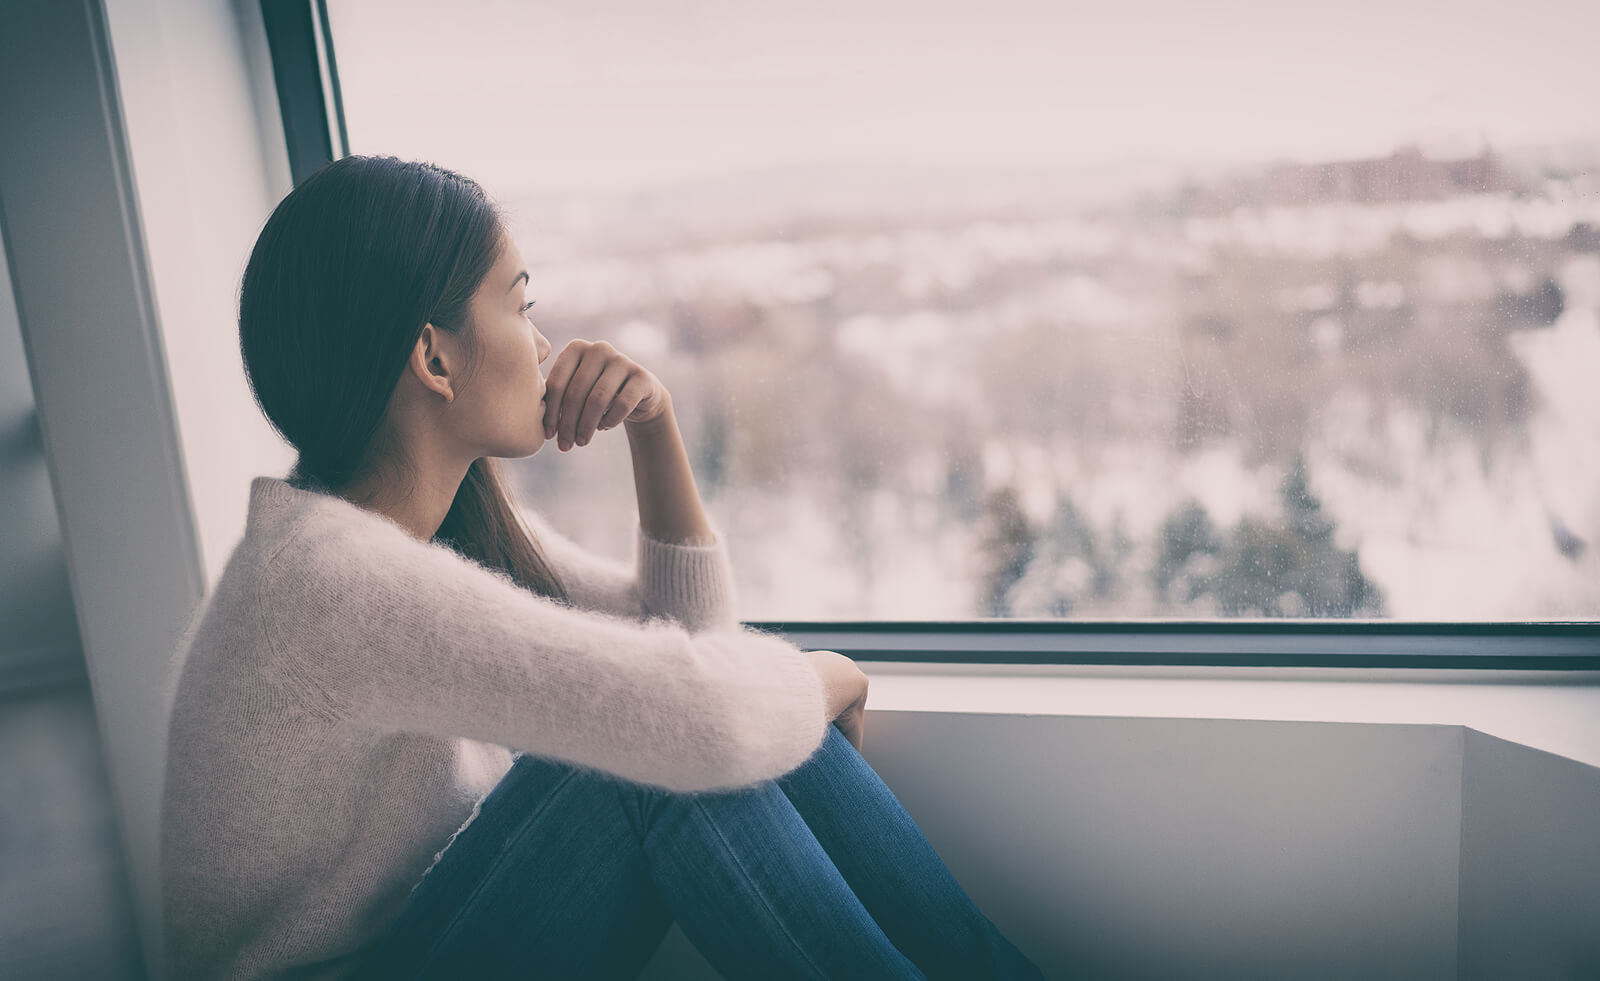 Young woman sitting by a window looking out pensively. PTSD treatment does not have to be scary. Our online PTSD therapist in Ohio is here to gently guide you through the process.